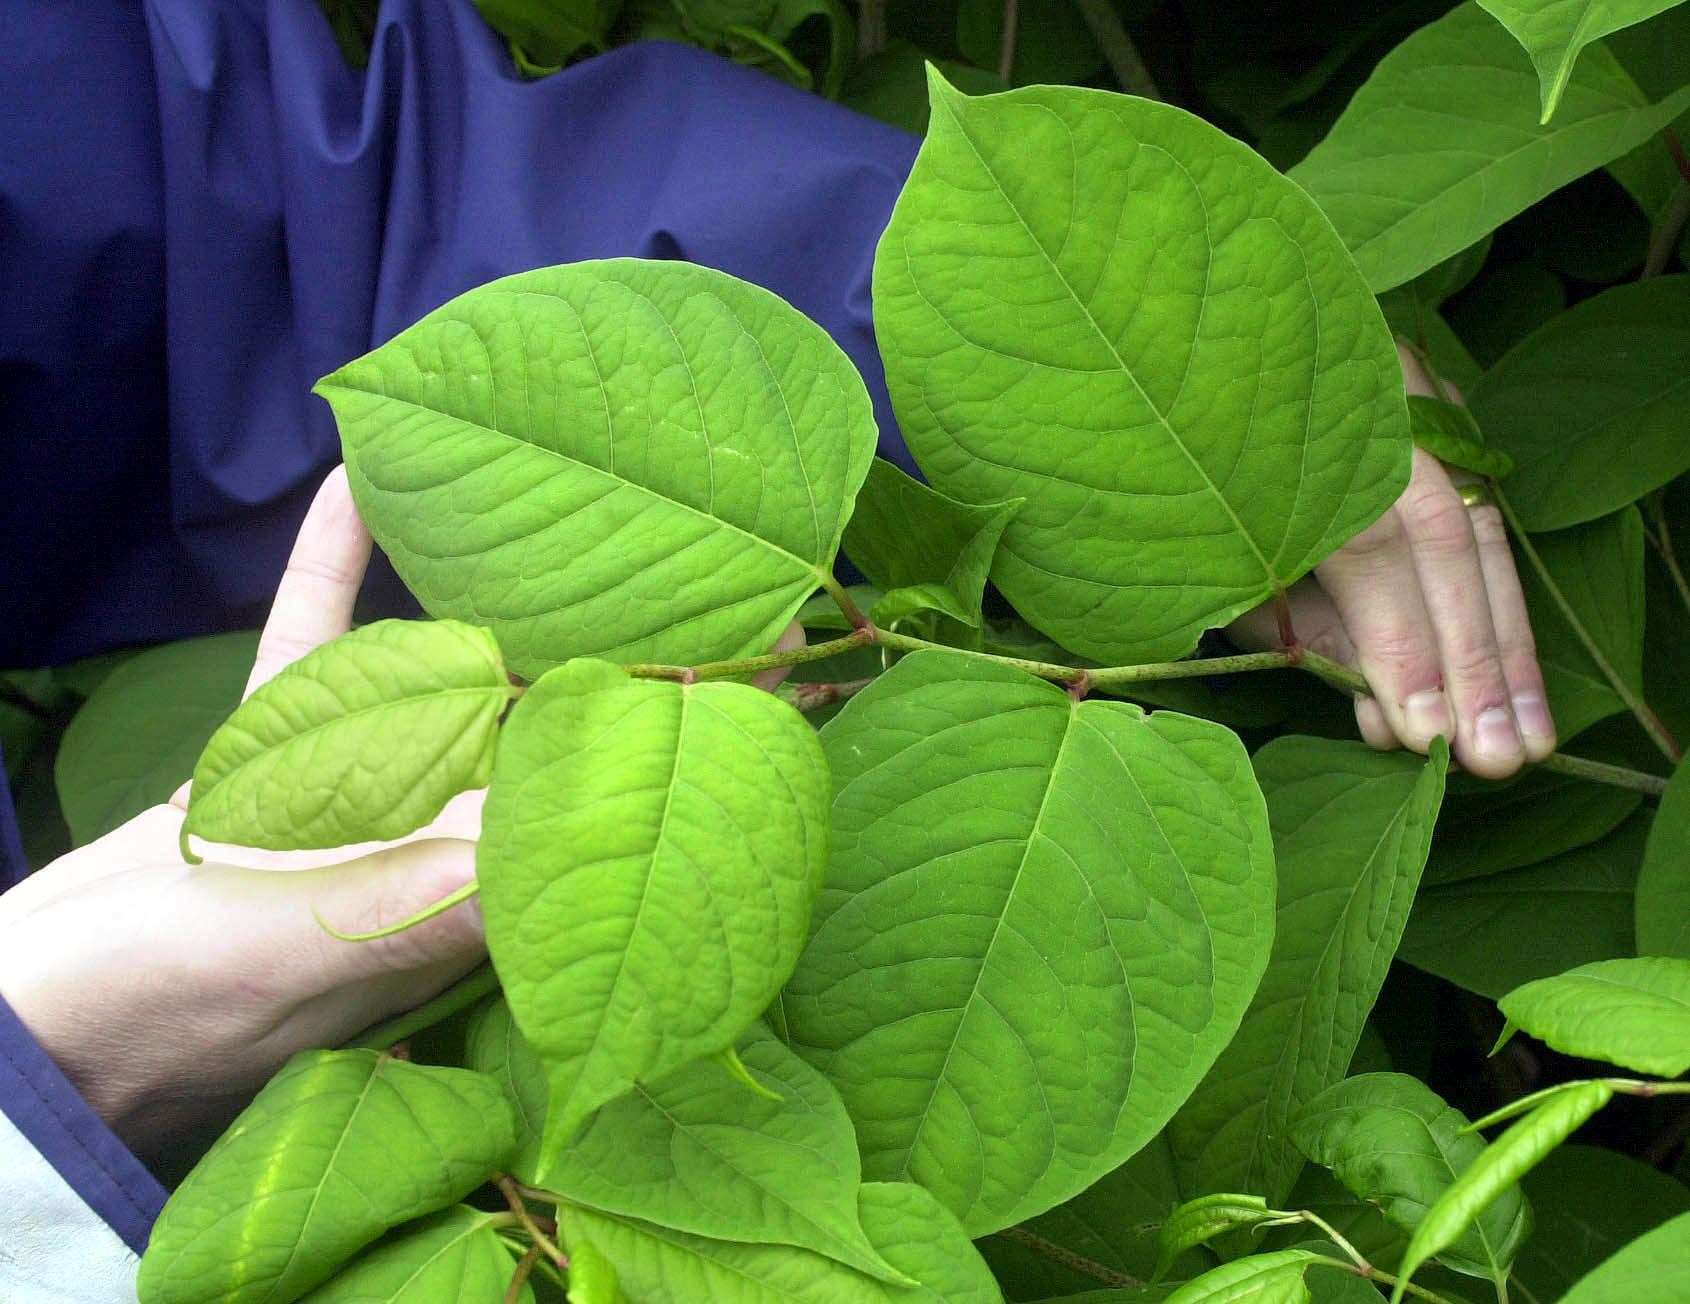 Japanese knotweed is an invasive plant species in the UK (Barry Batchelor/PA)